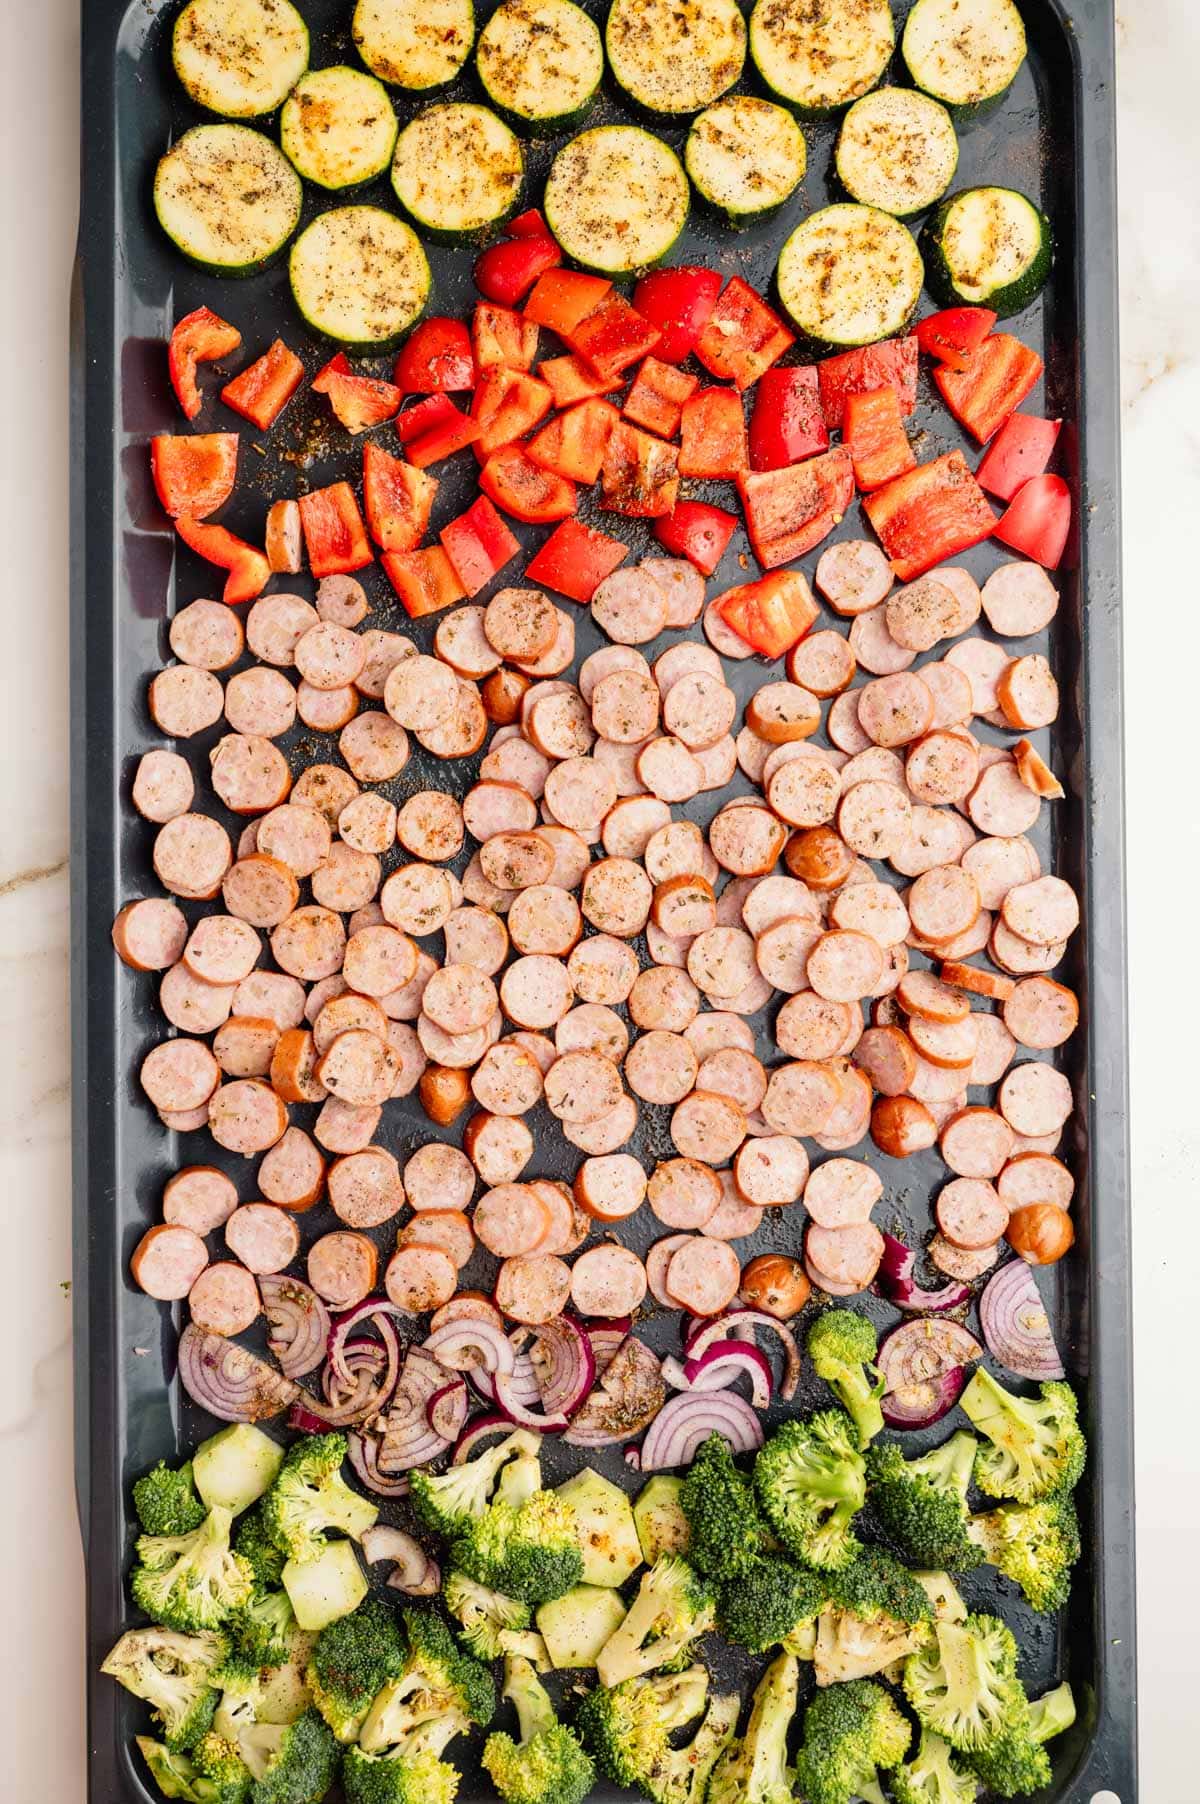 Sliced sausage and seasoned chopped vegetables on a baking sheet ready to be baked.